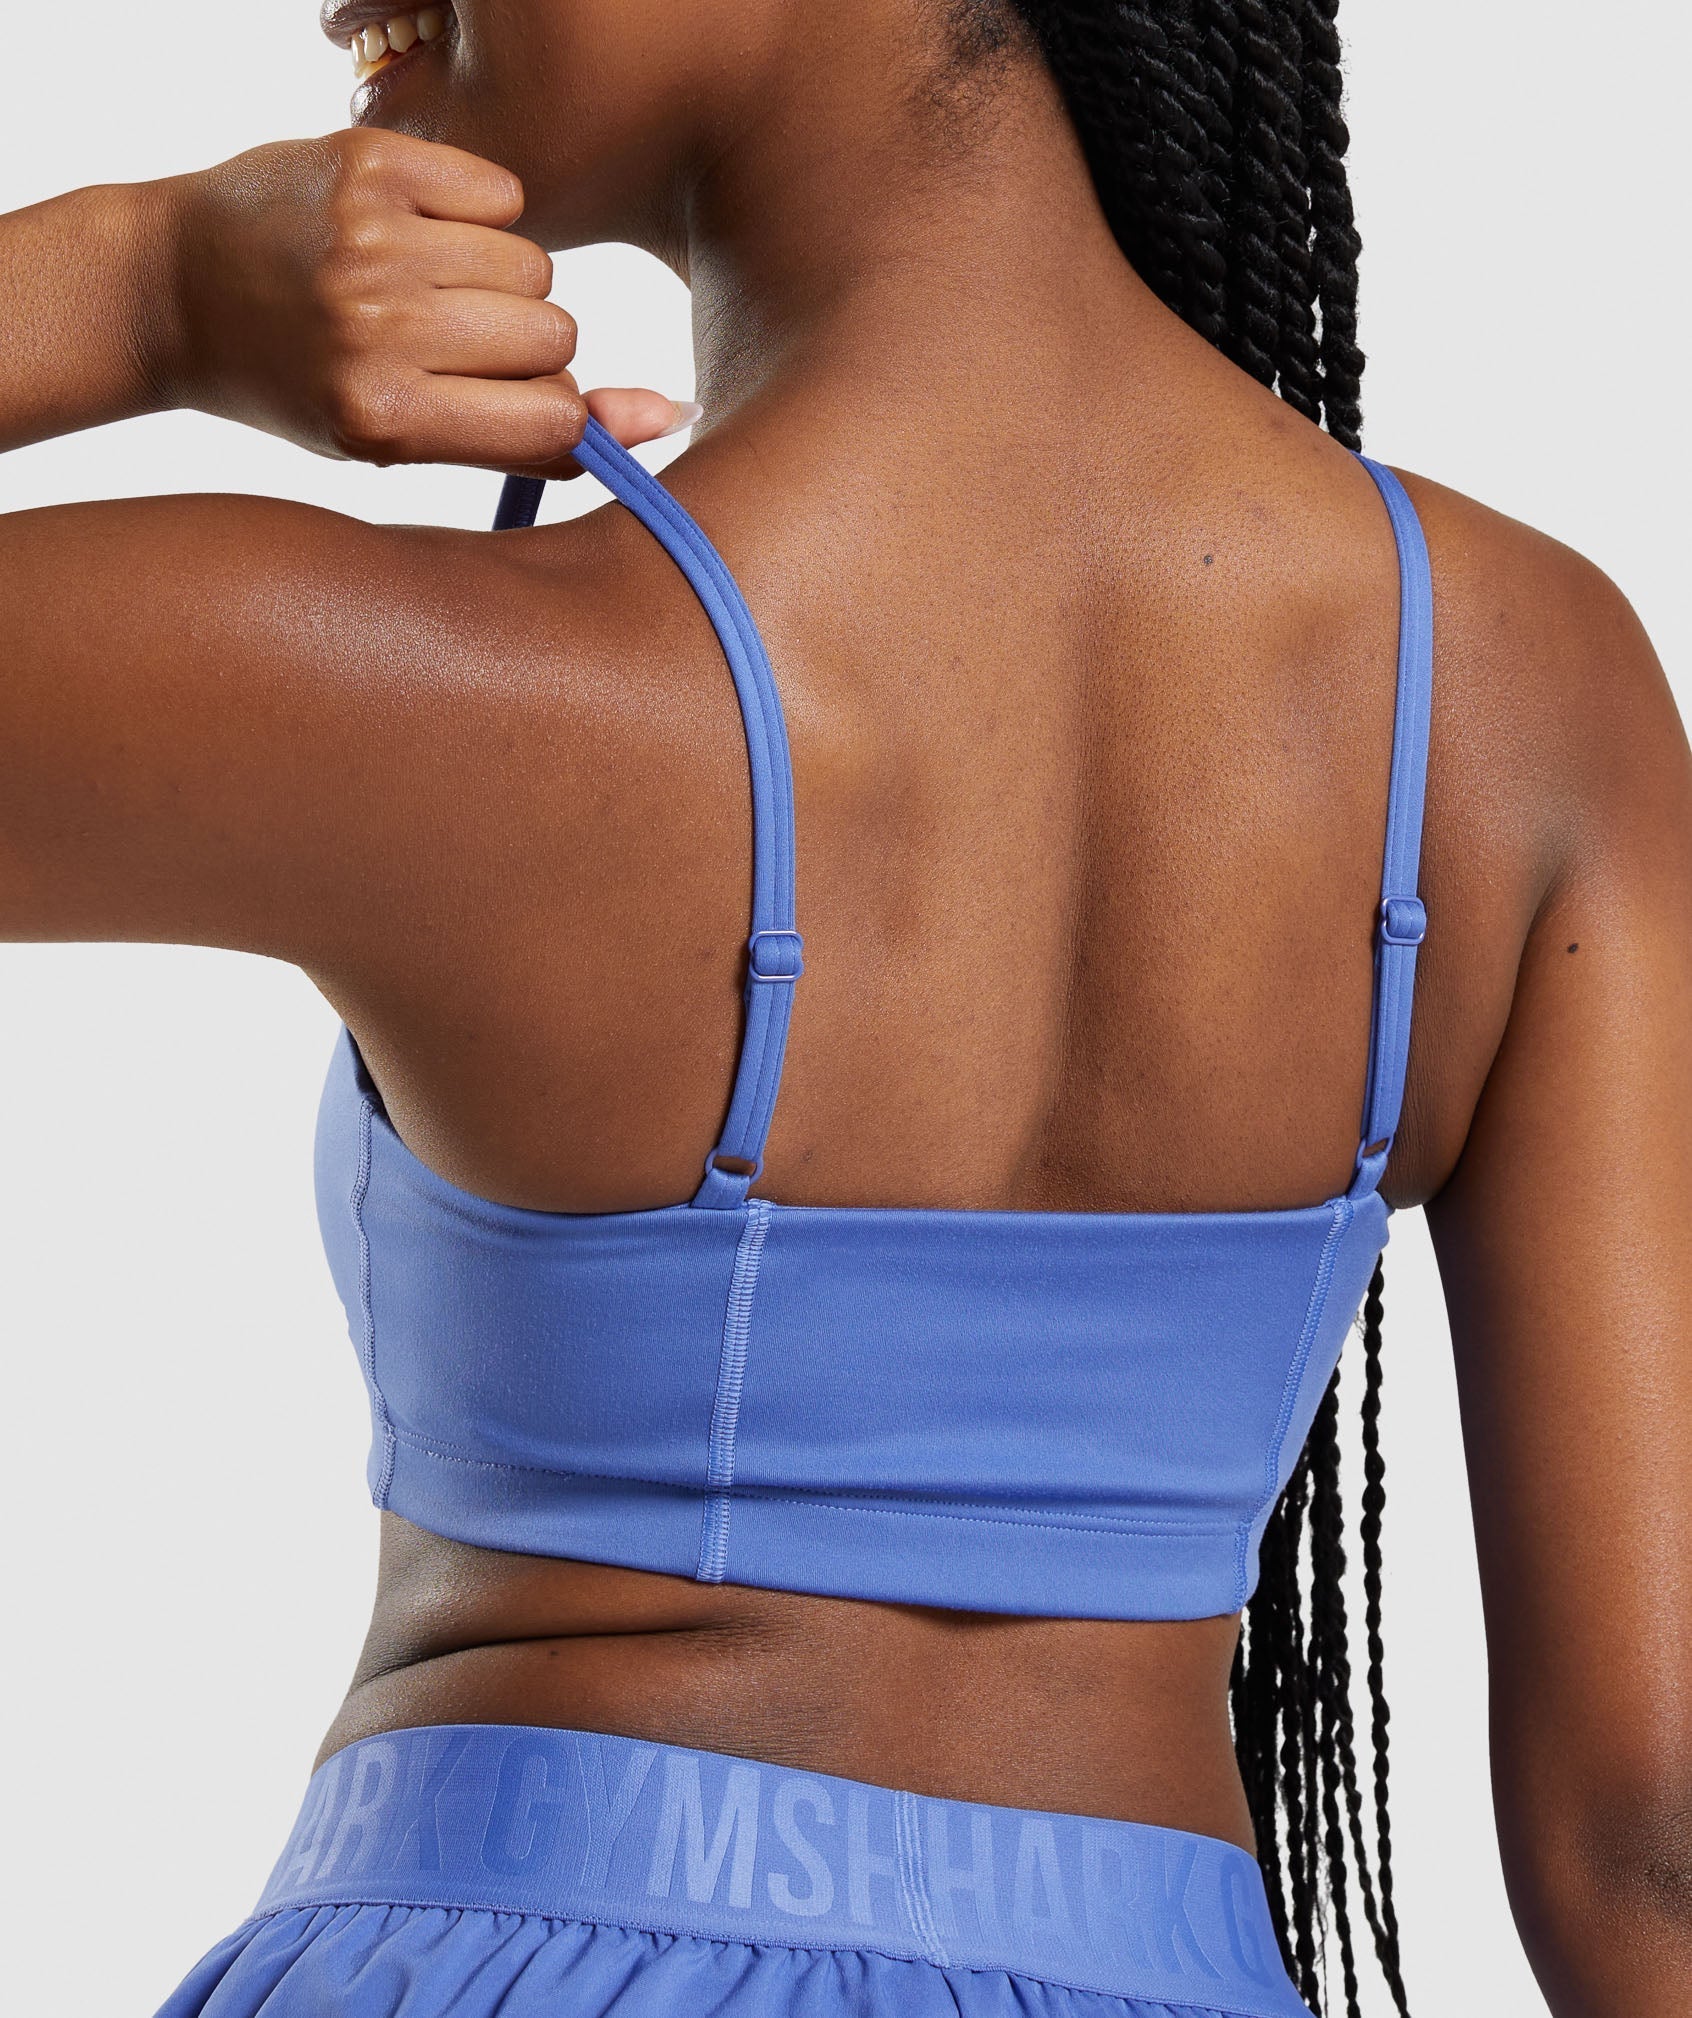 Justice, Other, Justice Sports Bra